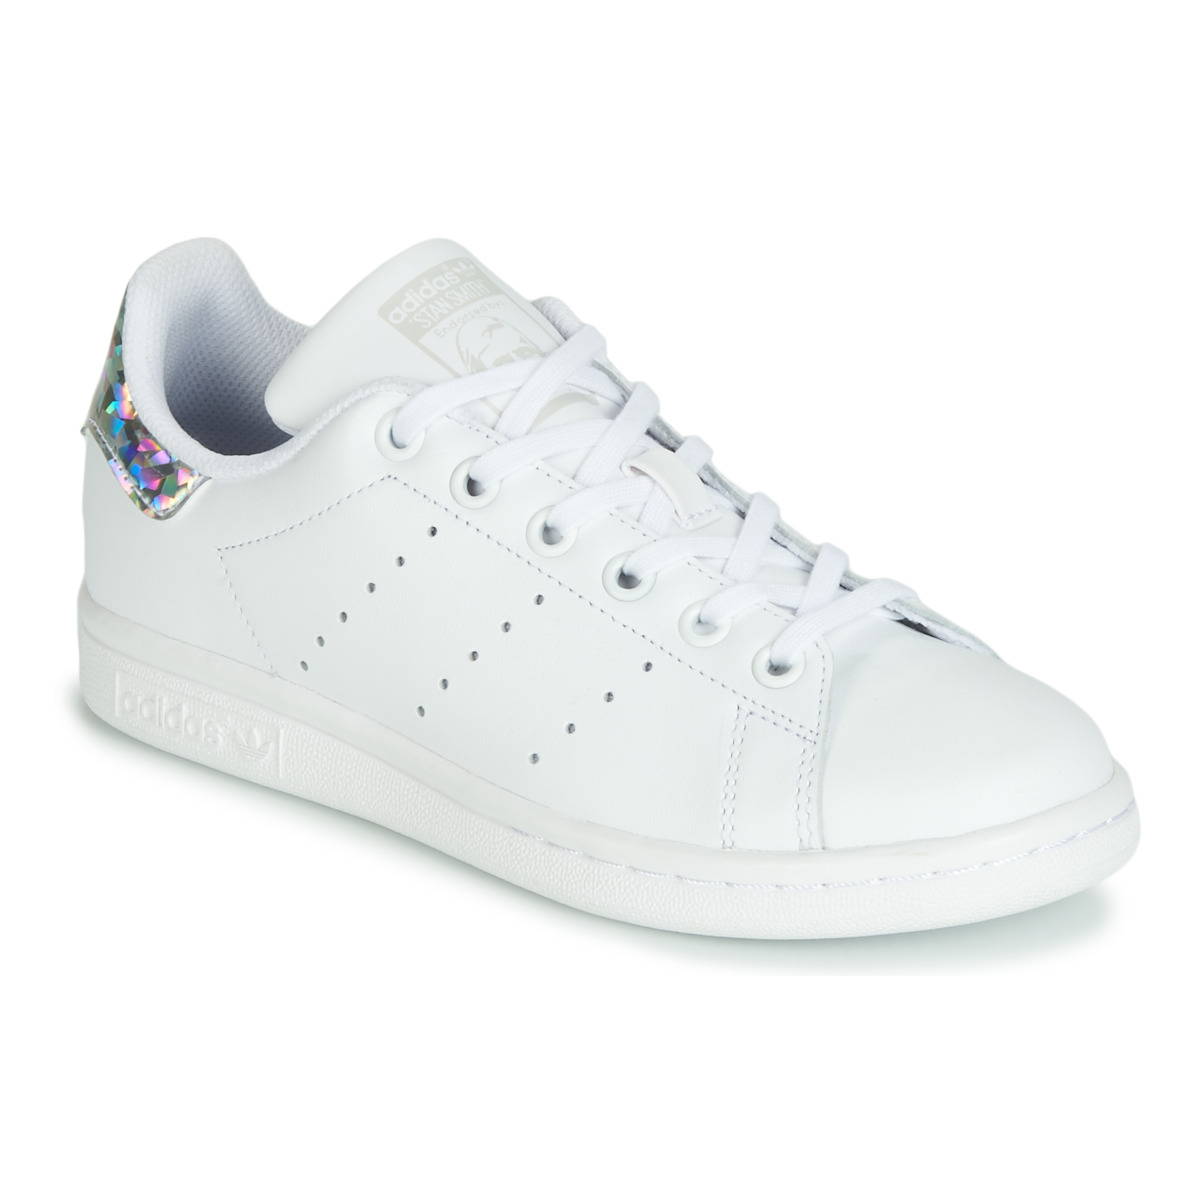 From Dazzling for me Stan Smith Smith Clearance, SAVE 35% - aveclumiere.com